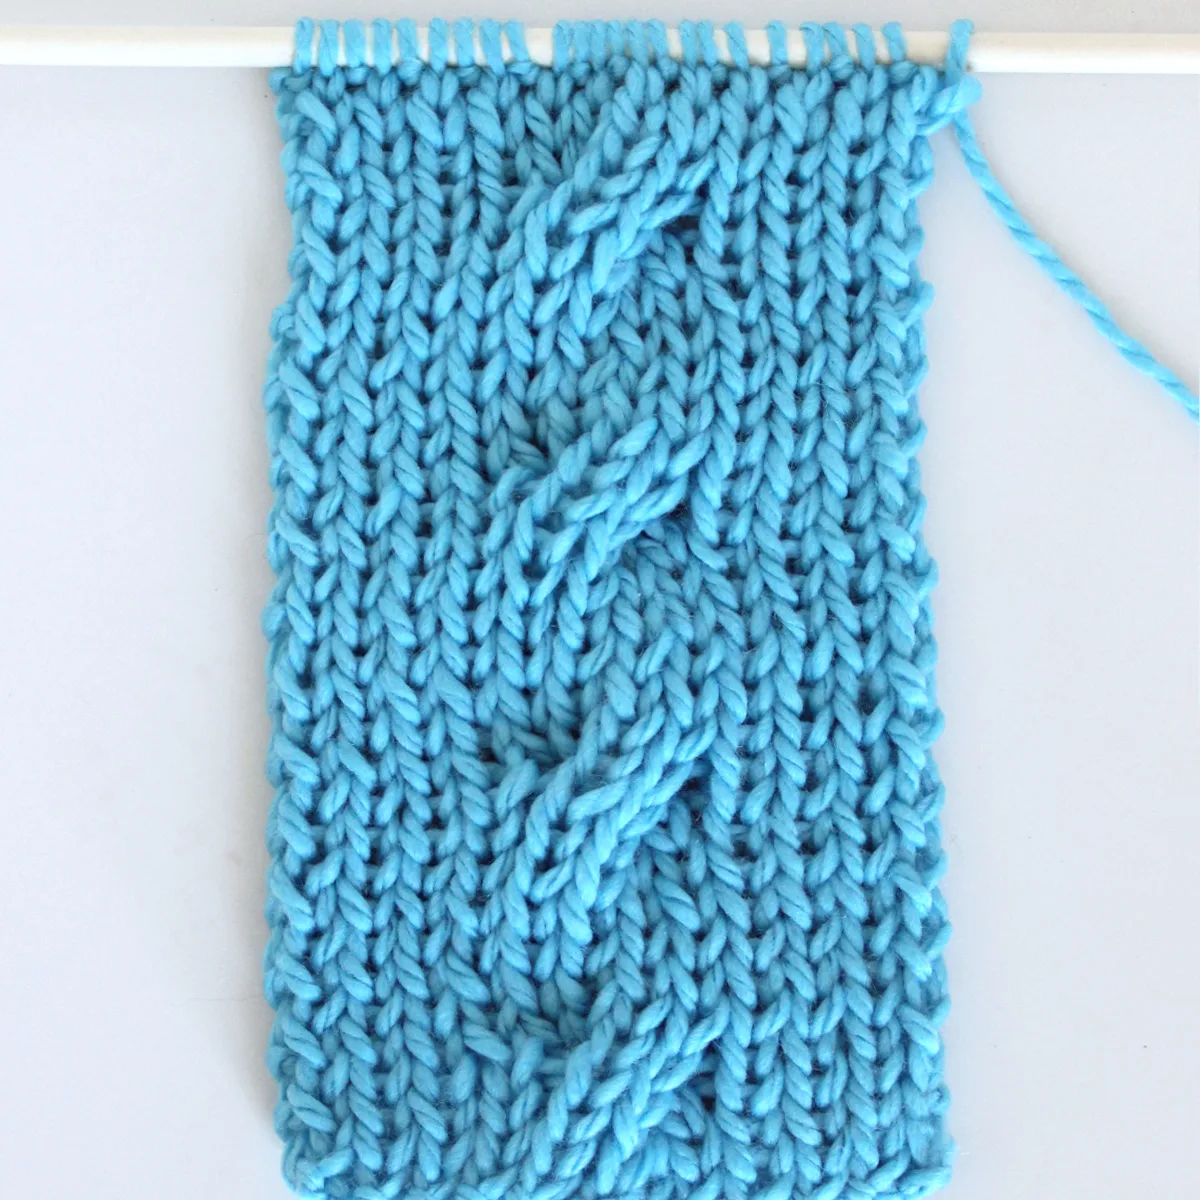 Reversible Cable Stitch Ribbles on 1x1 Rib Stitch Background in blue color yarn.